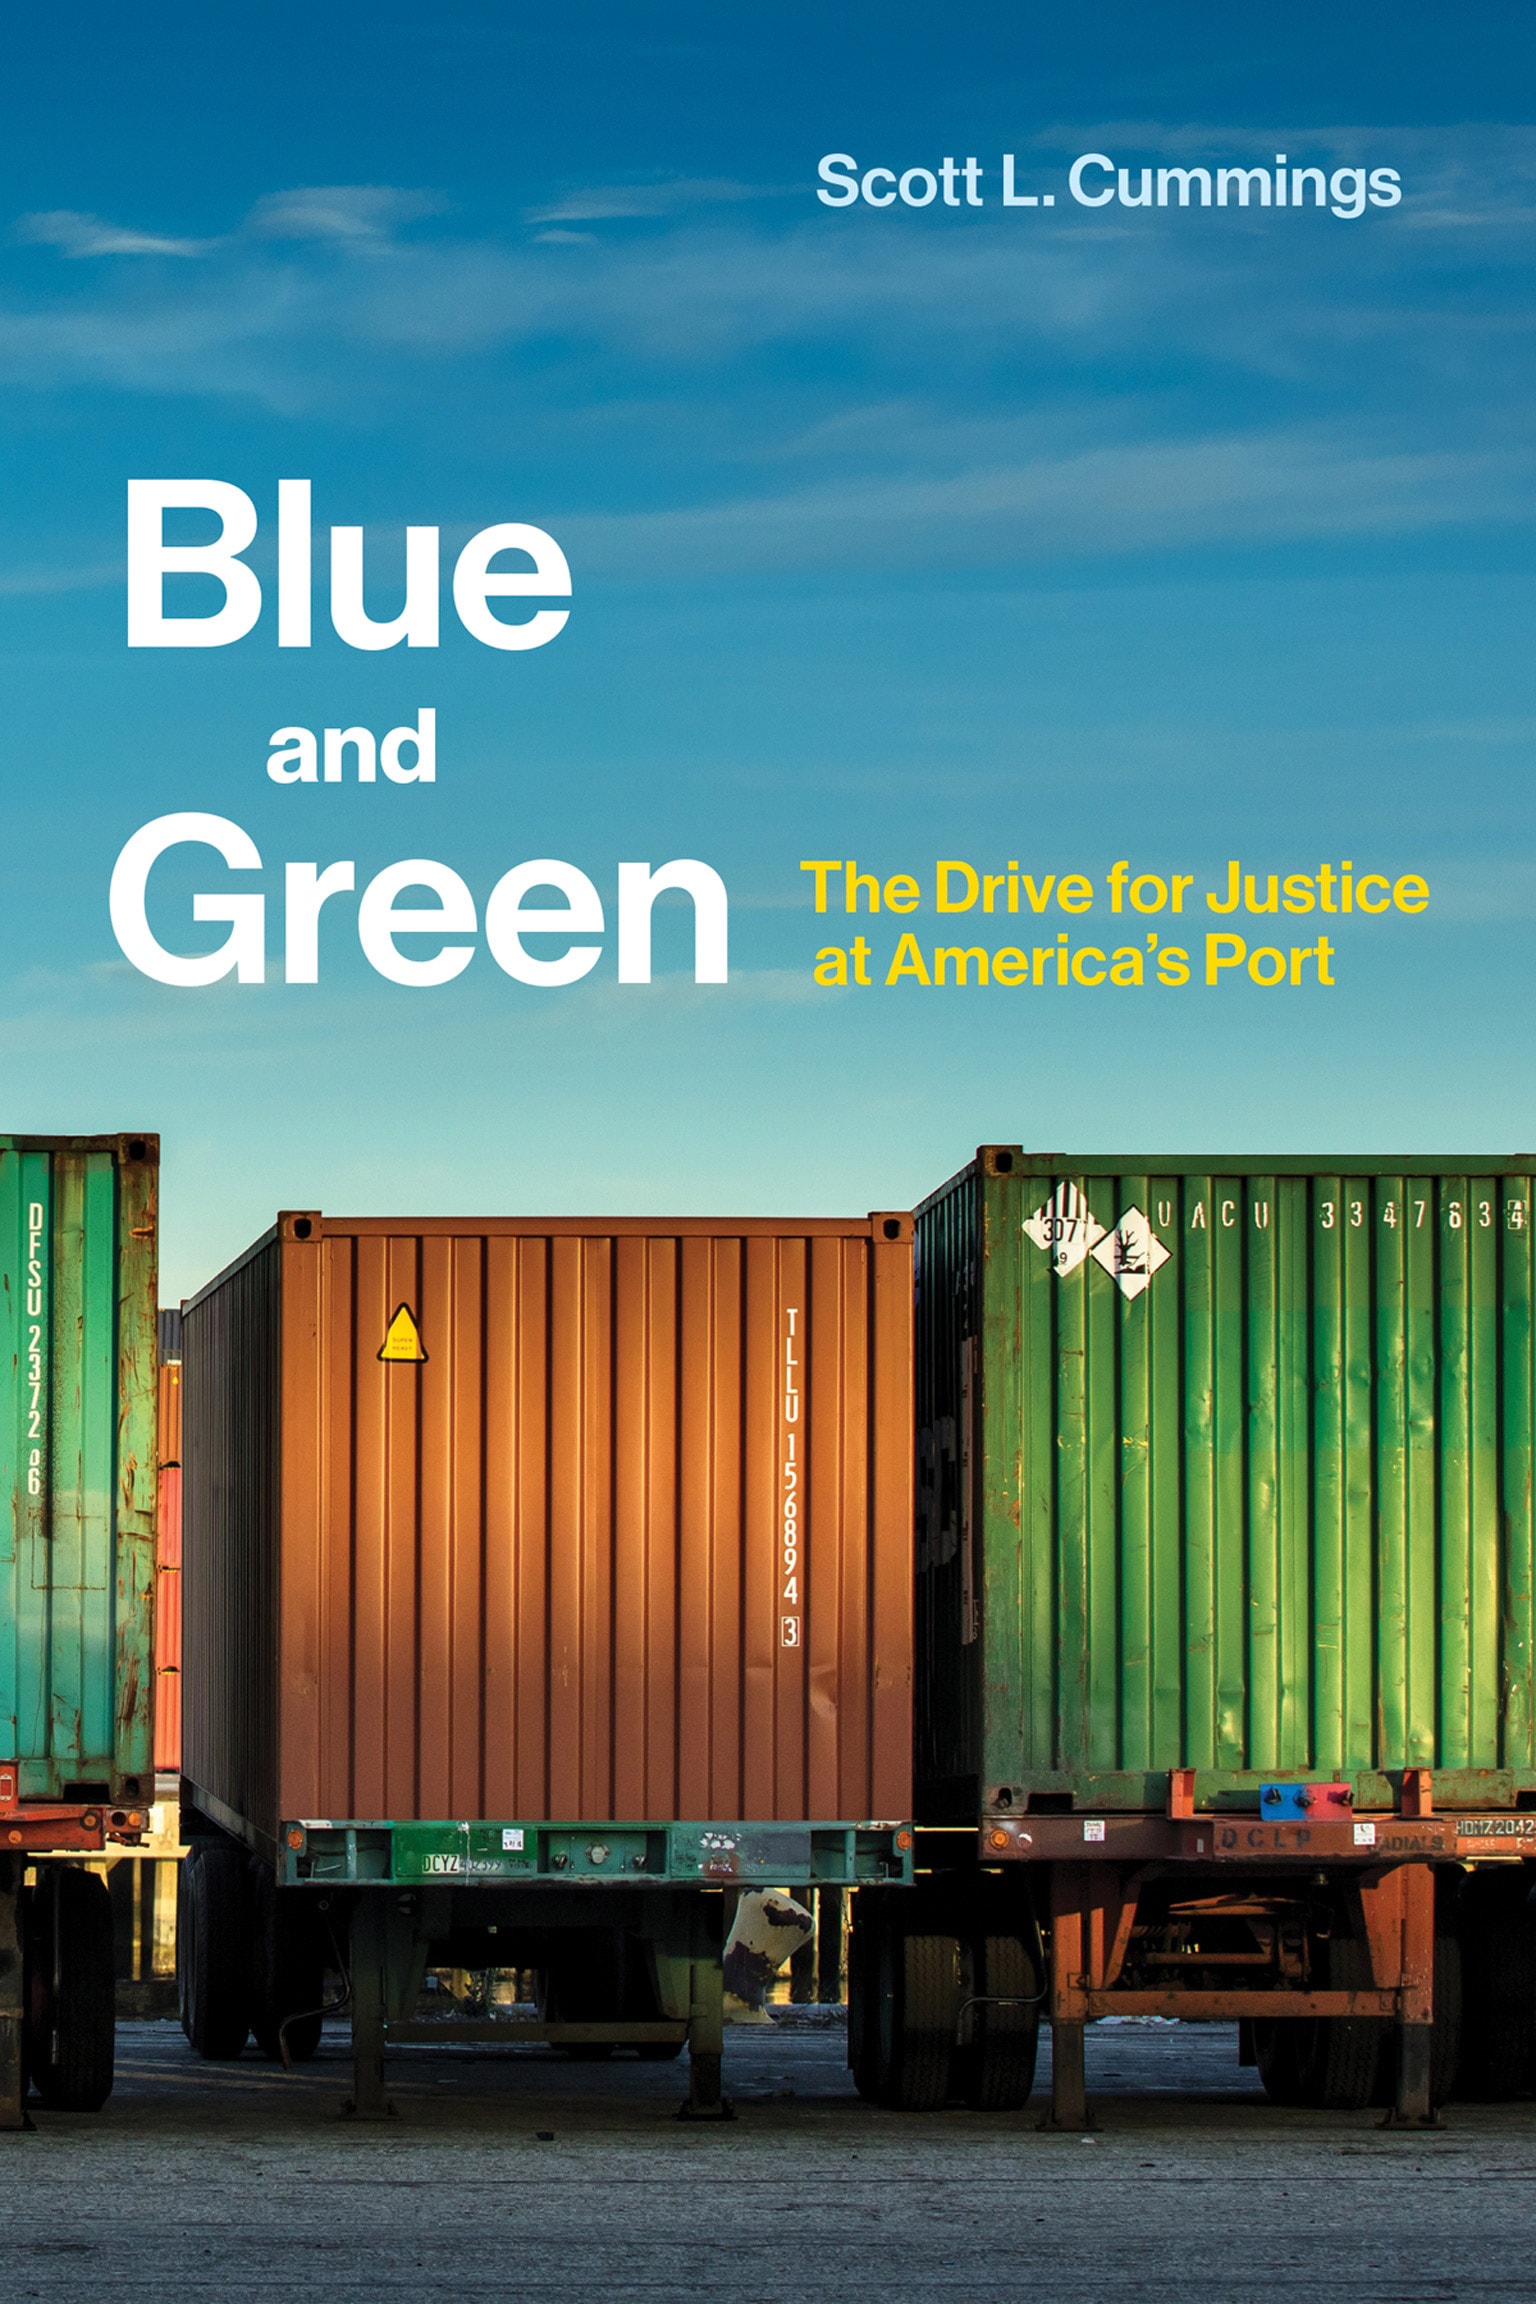 Blue and Green: The Drive for Justice at America’s Port by Scott L. Cummings